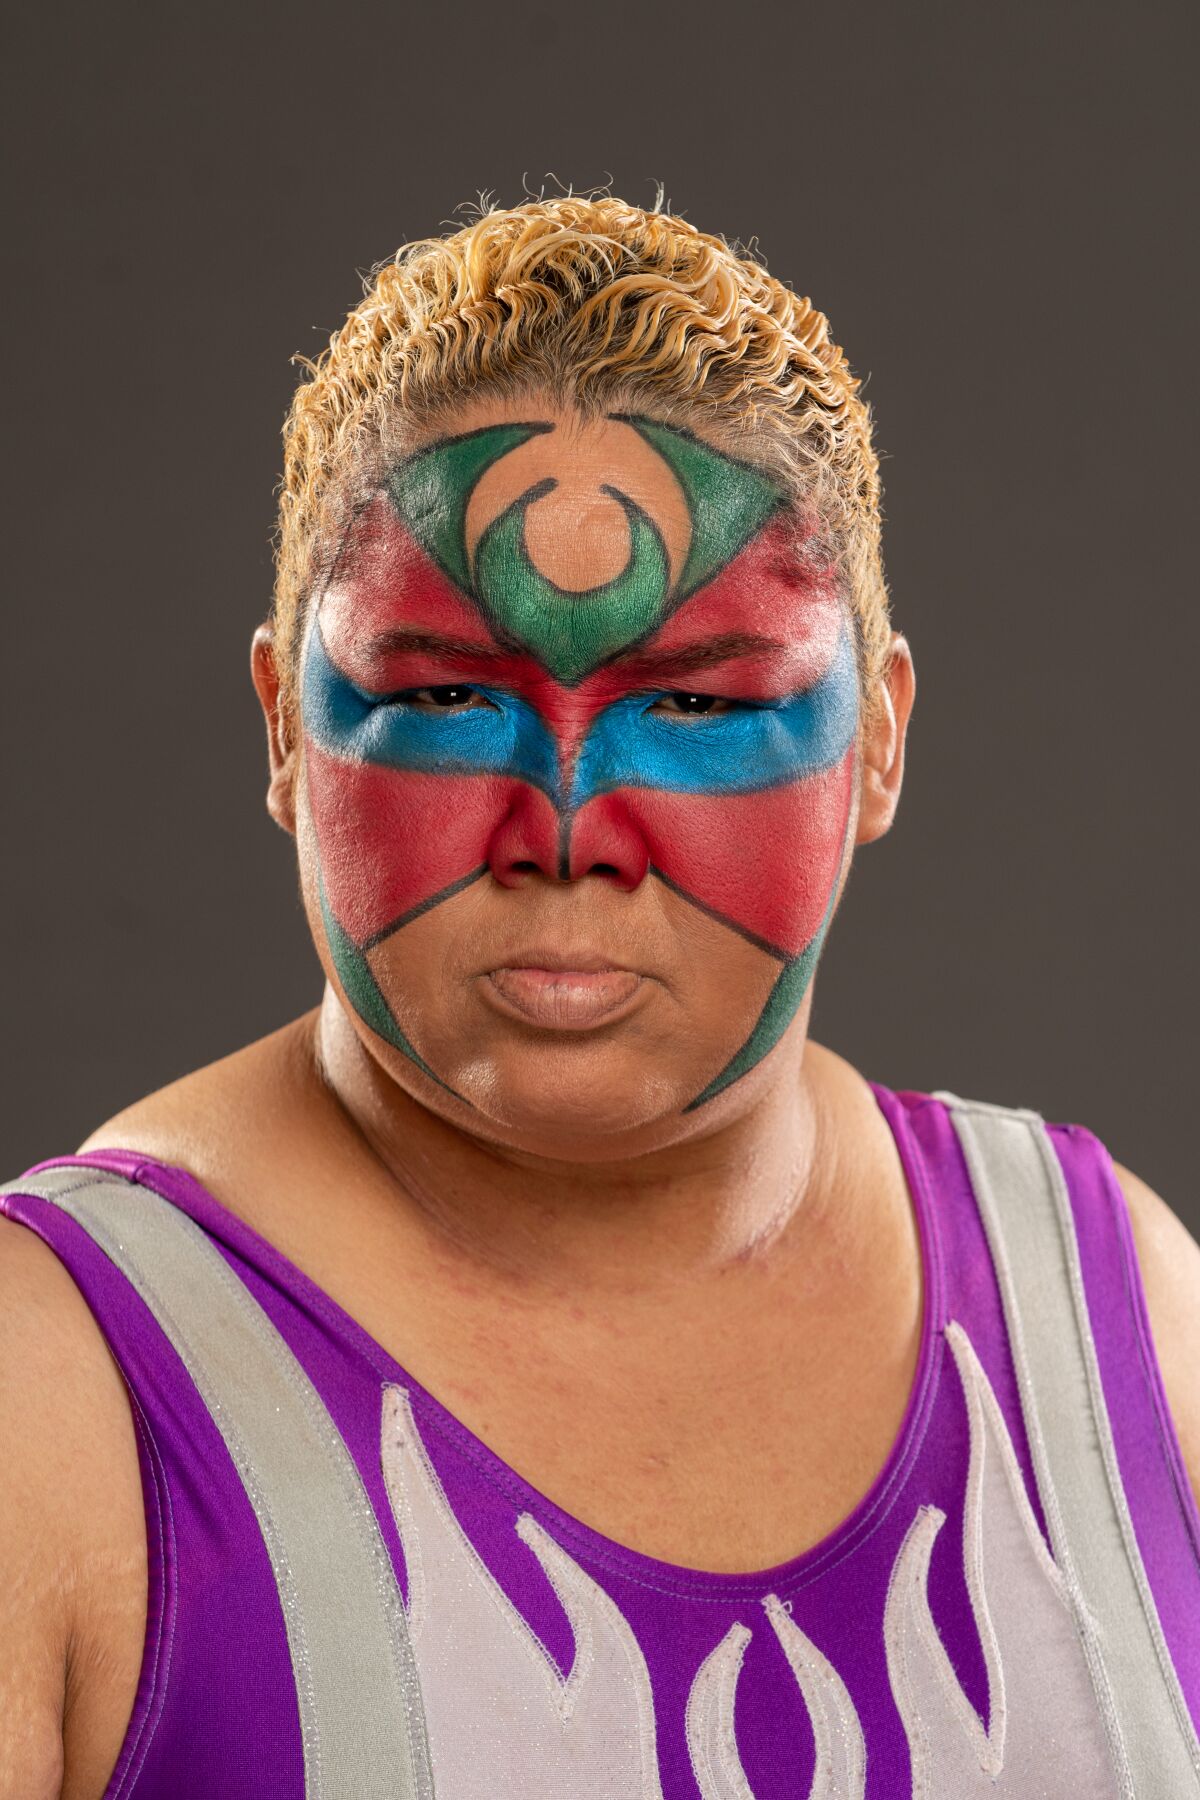 A wrestler with face paint poses for a portrait.